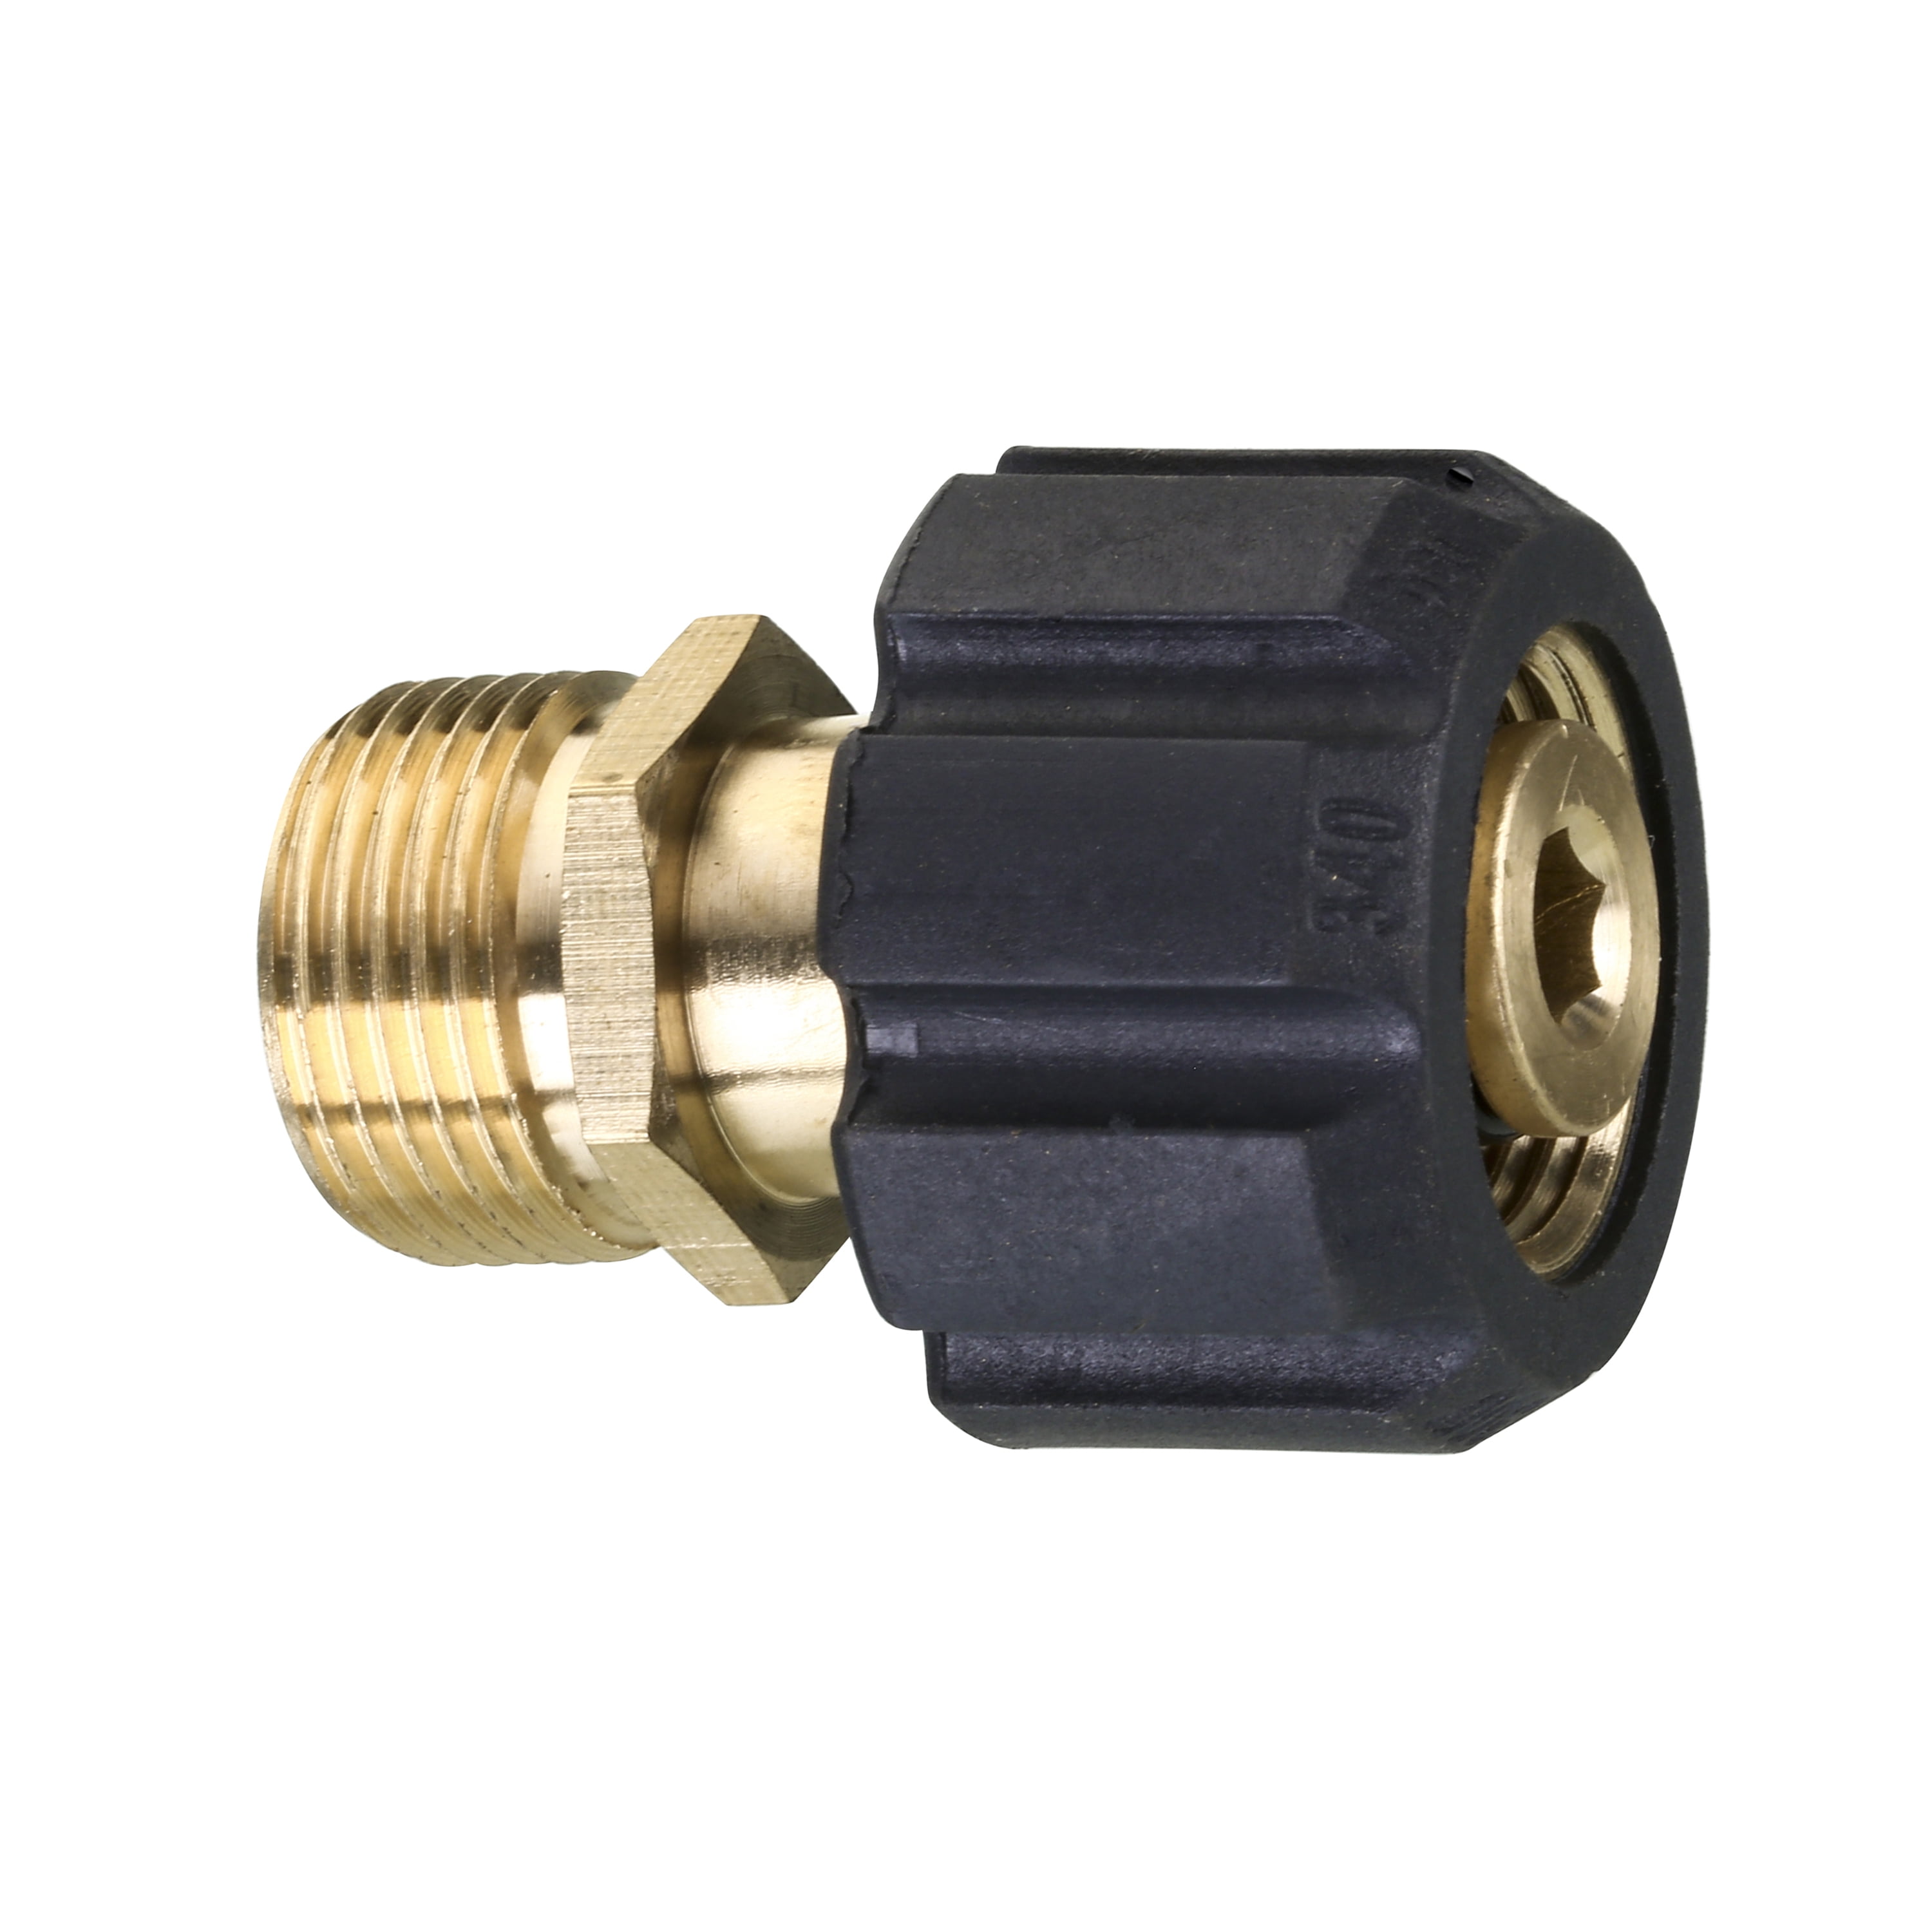 Internal Thread Hose Pipe Adapter Metric M22 15mm Male Thread to M22 14mm Female Fitting 4500 PSI HNYRI Pressure Washer Coupler M22 15mm Male to M22 14mm Female